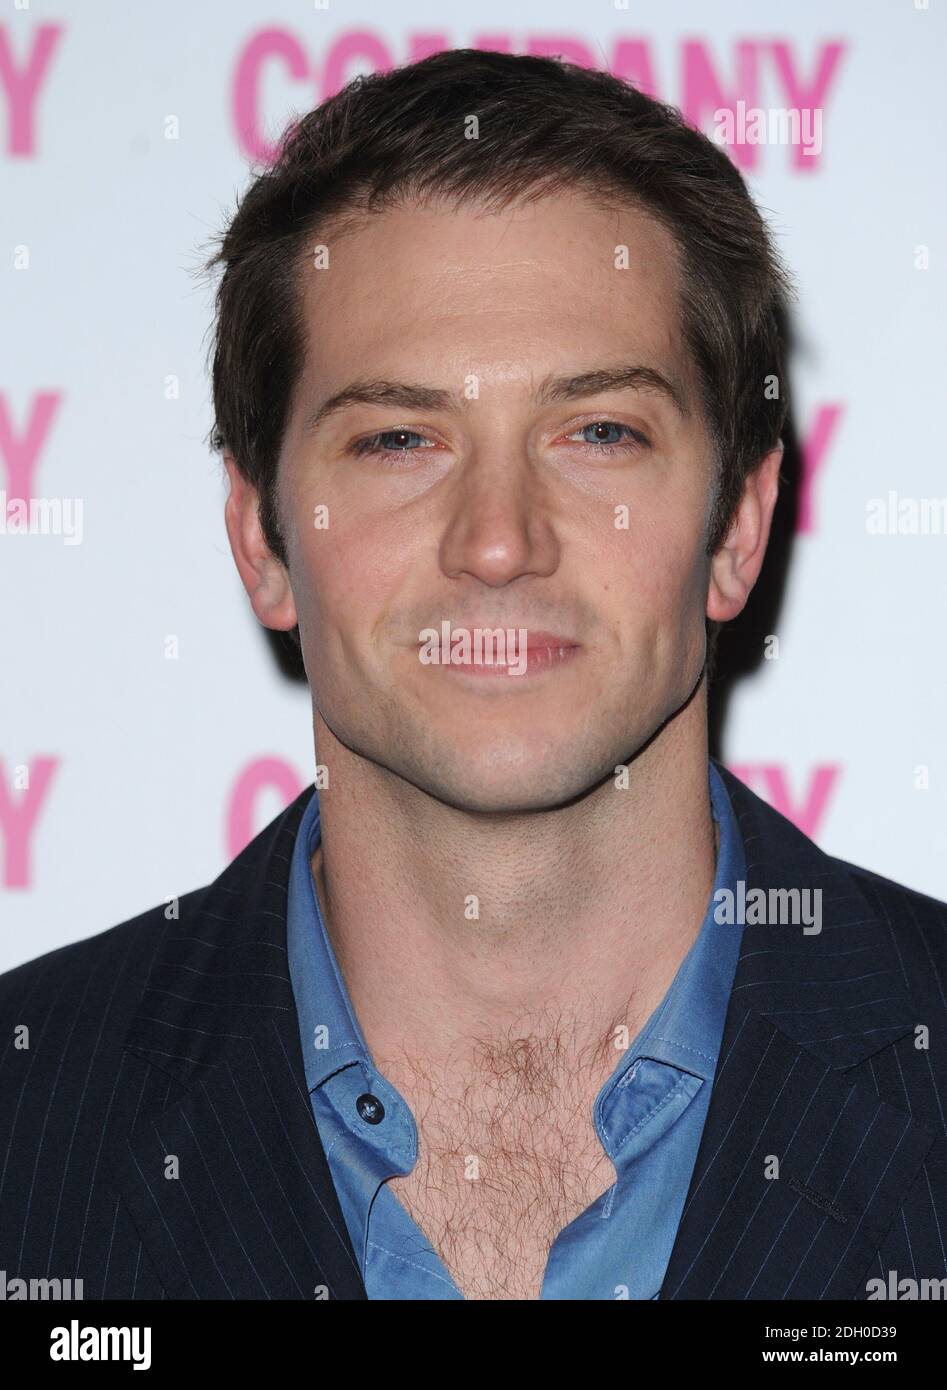 Luke Roberts arriving at the Company Magazine 30th Birthday Party at the Proud Galleries in Camden, London. Stock Photo